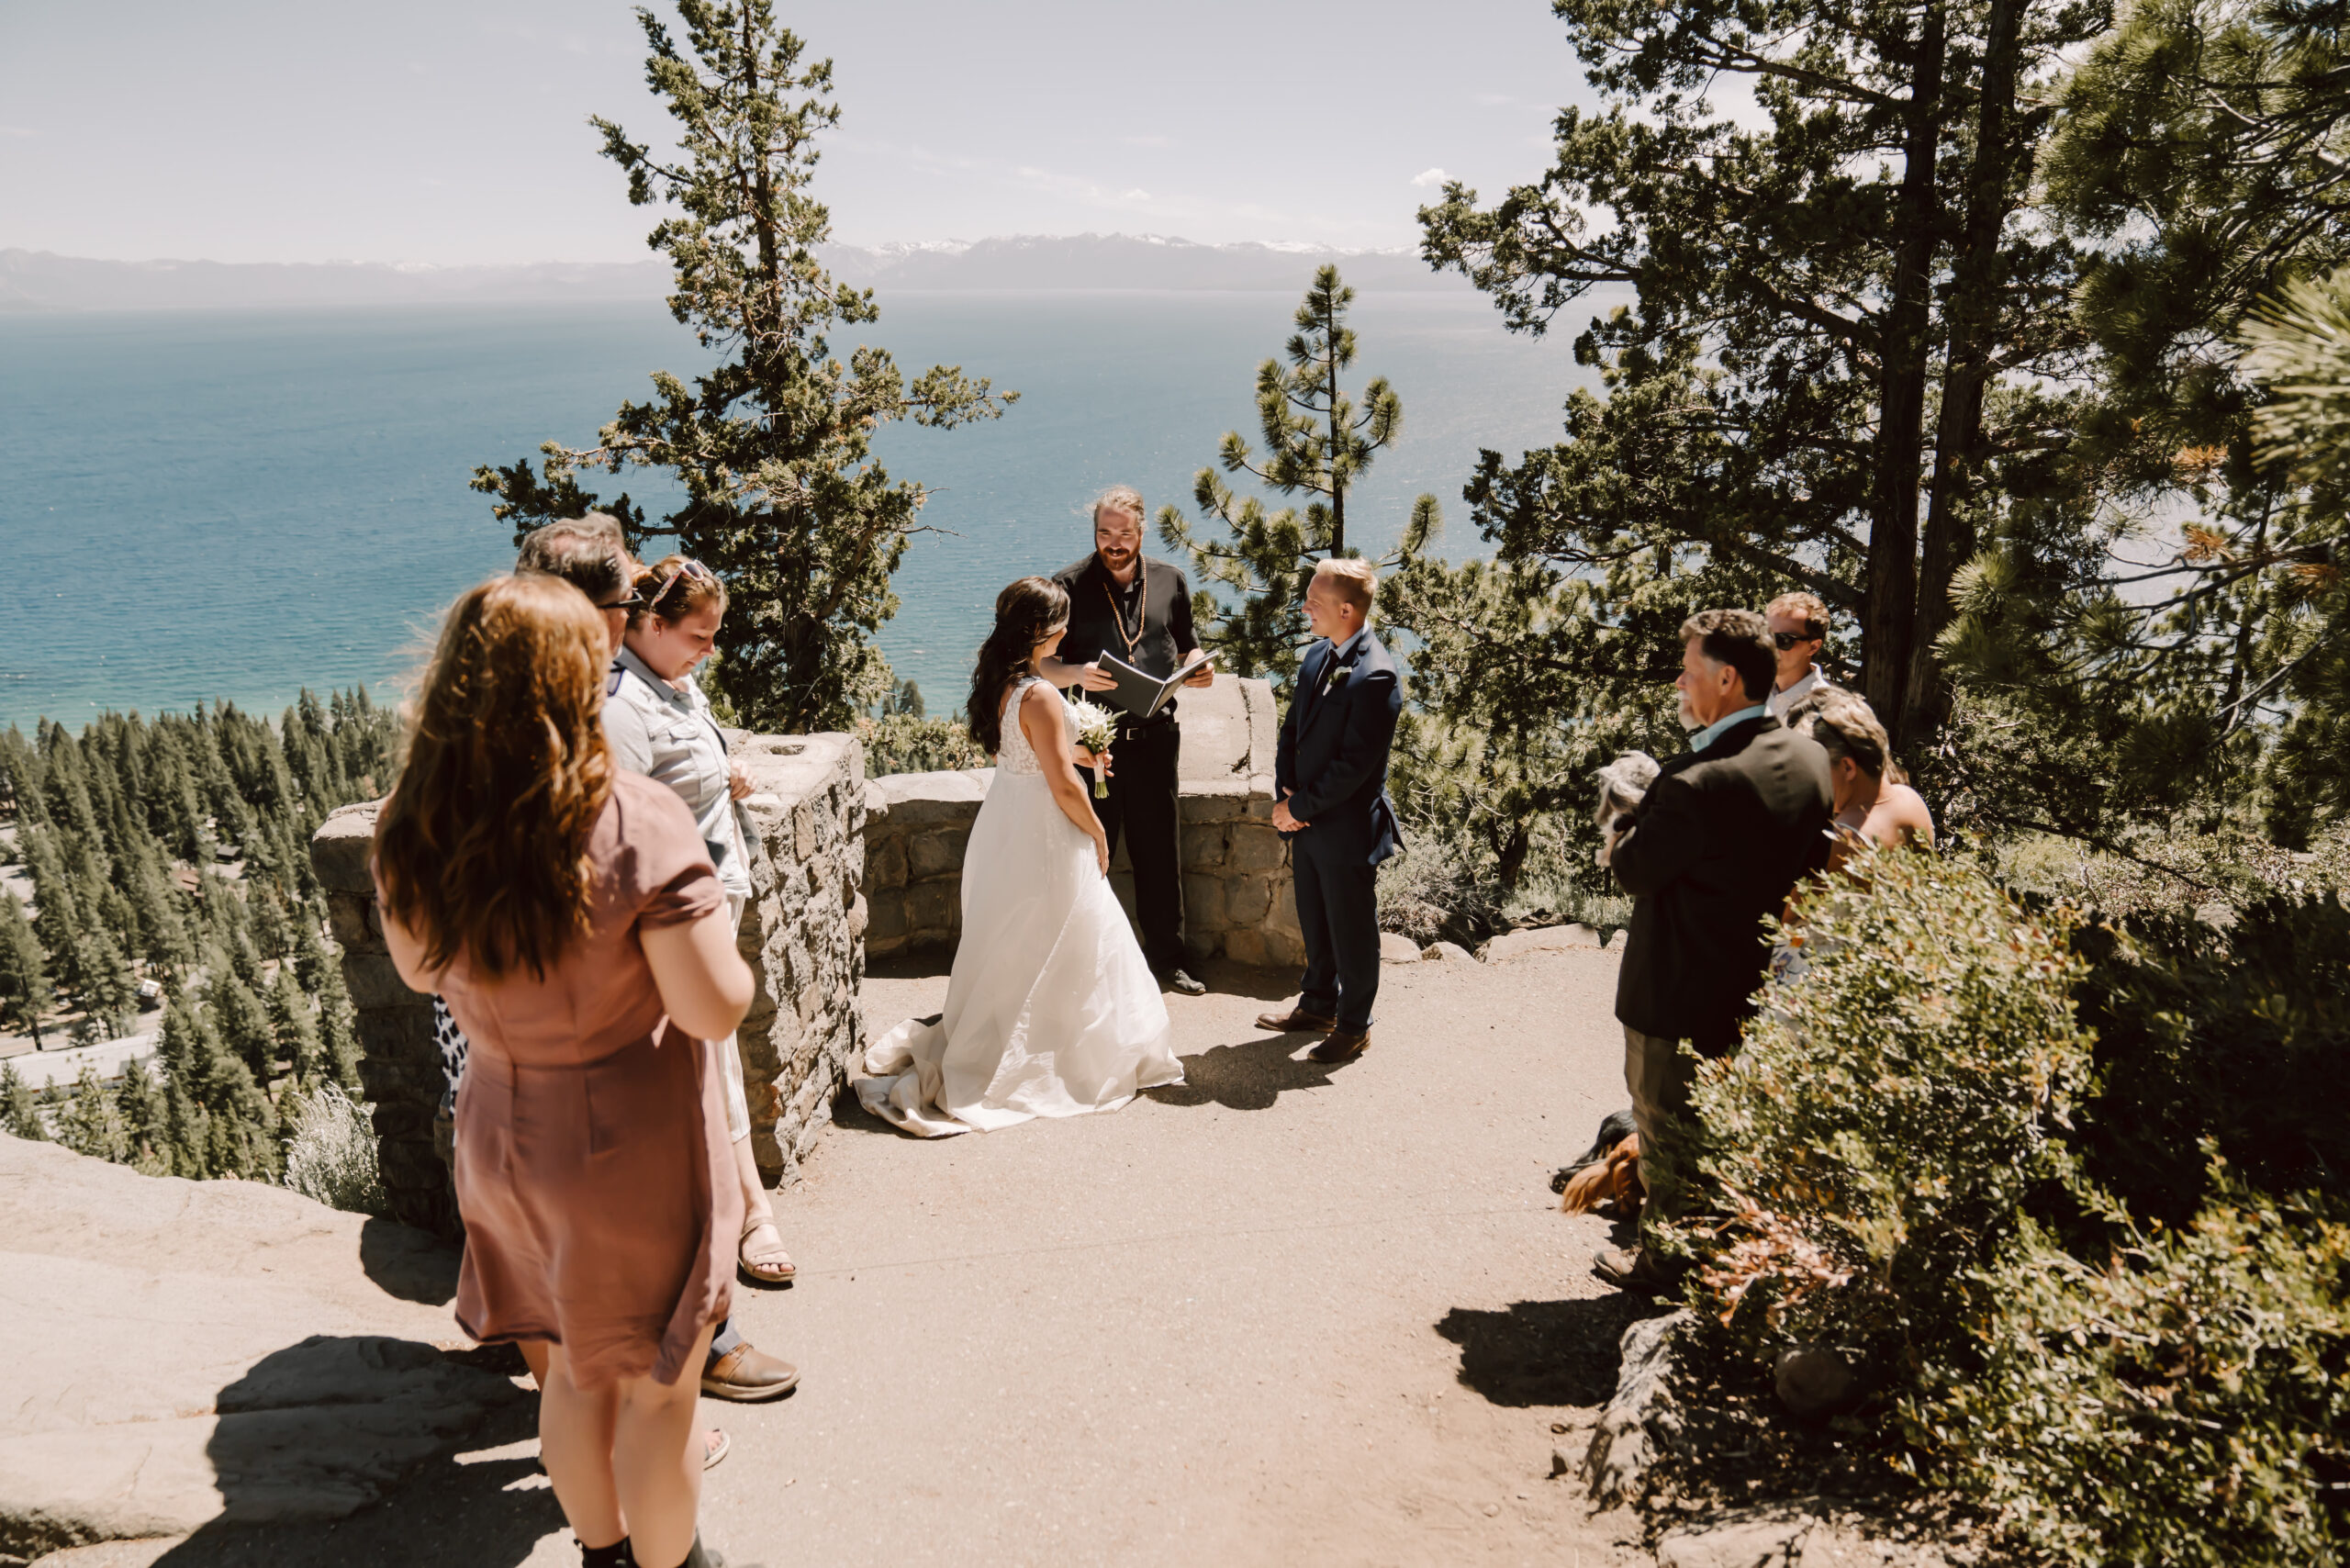 An Elopement ceremony overlooking Lake Tahoe with just a small amount of friends and family